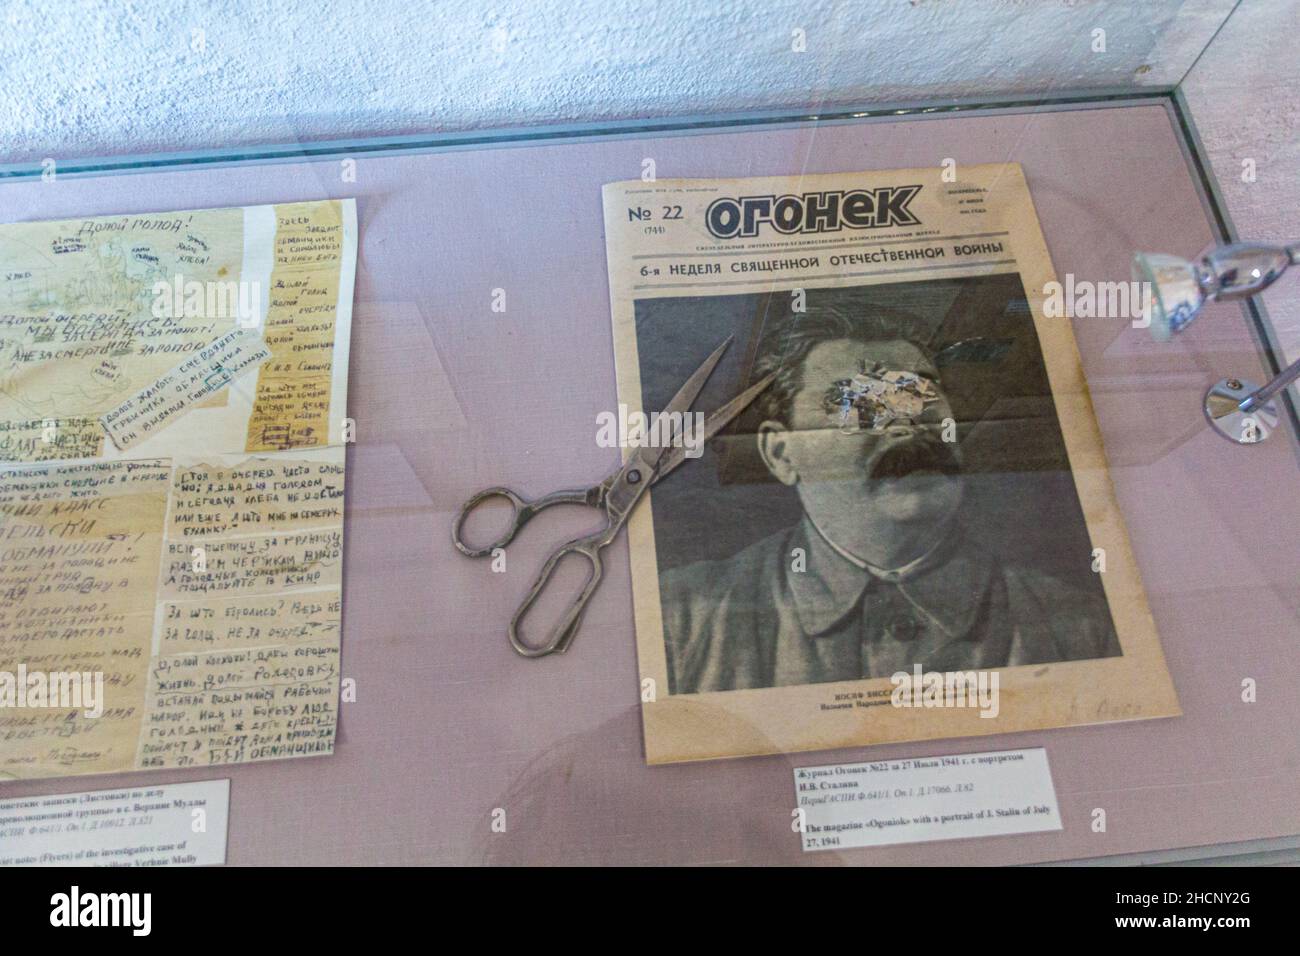 PERM KRAI, RUSSIA - JULY 1, 2018: Exhibit in the Museum of the History of Political Repression Perm-36 Gulag Museum , Russia Stock Photo